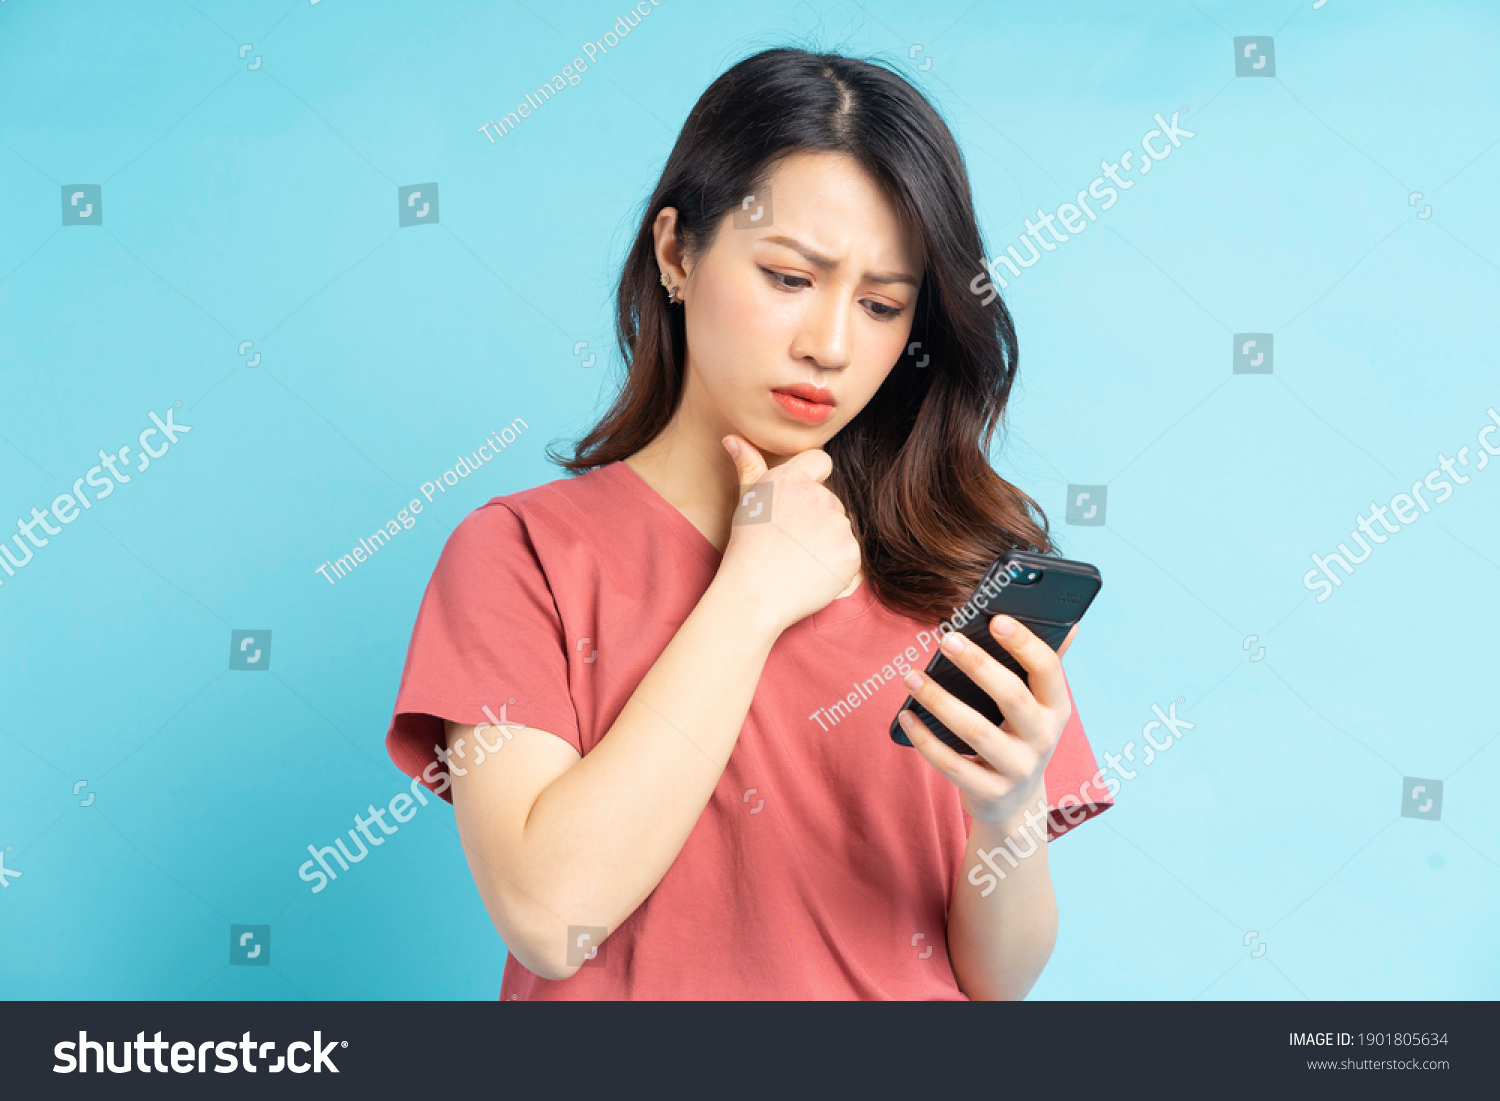 Beautiful Asian woman holding smartphone in hand with a thoughtful expression
 #1901805634